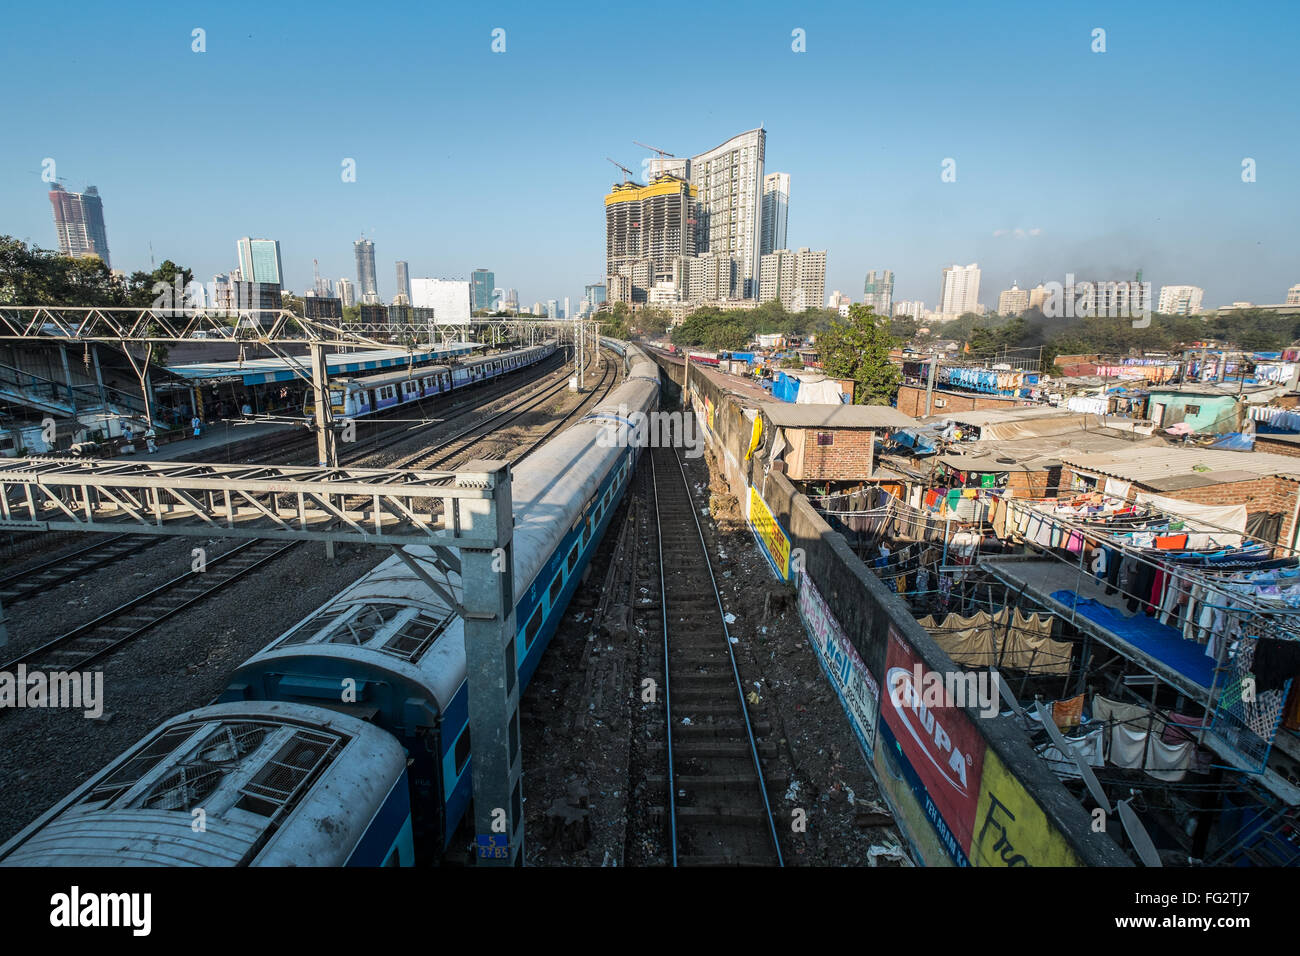 Railway lines and Central Mumbai's mix of slums and high rise buildings, India Stock Photo